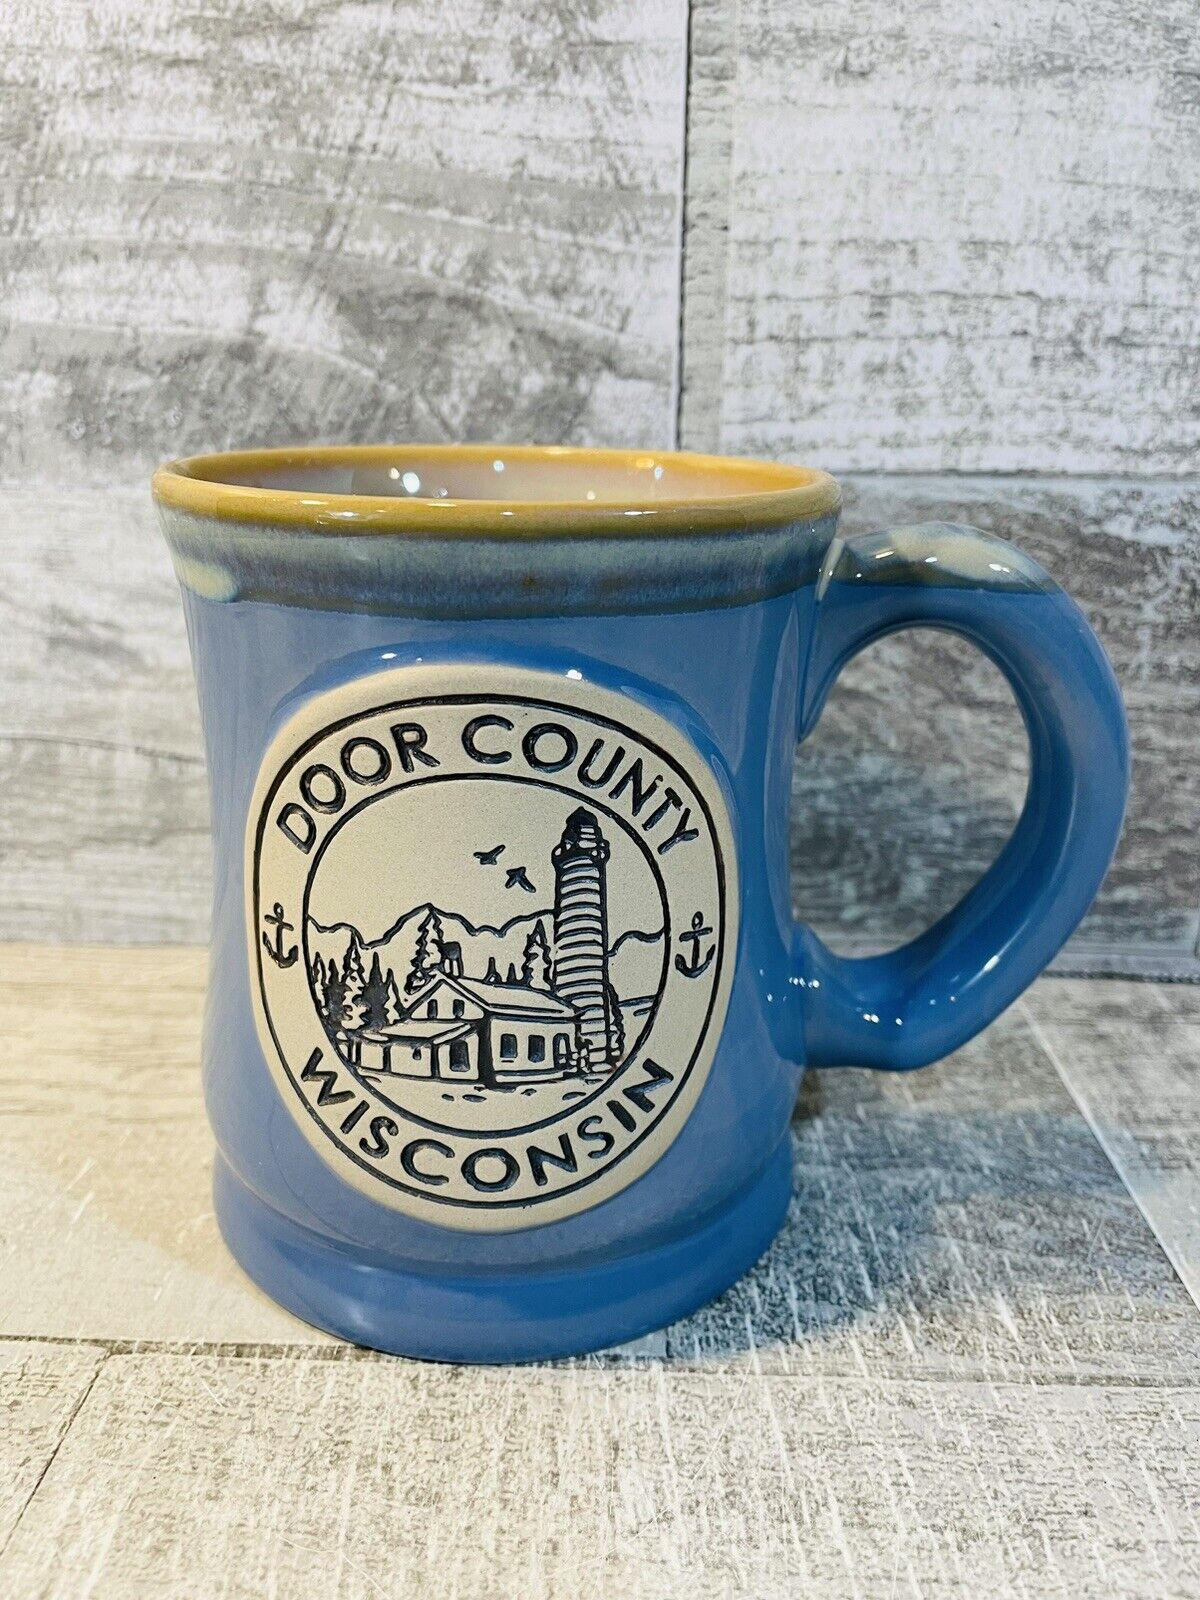 Door County Wisconsin Glazed Etched Blue Ceramic Large Coffee Mug Cup Cabin Lake